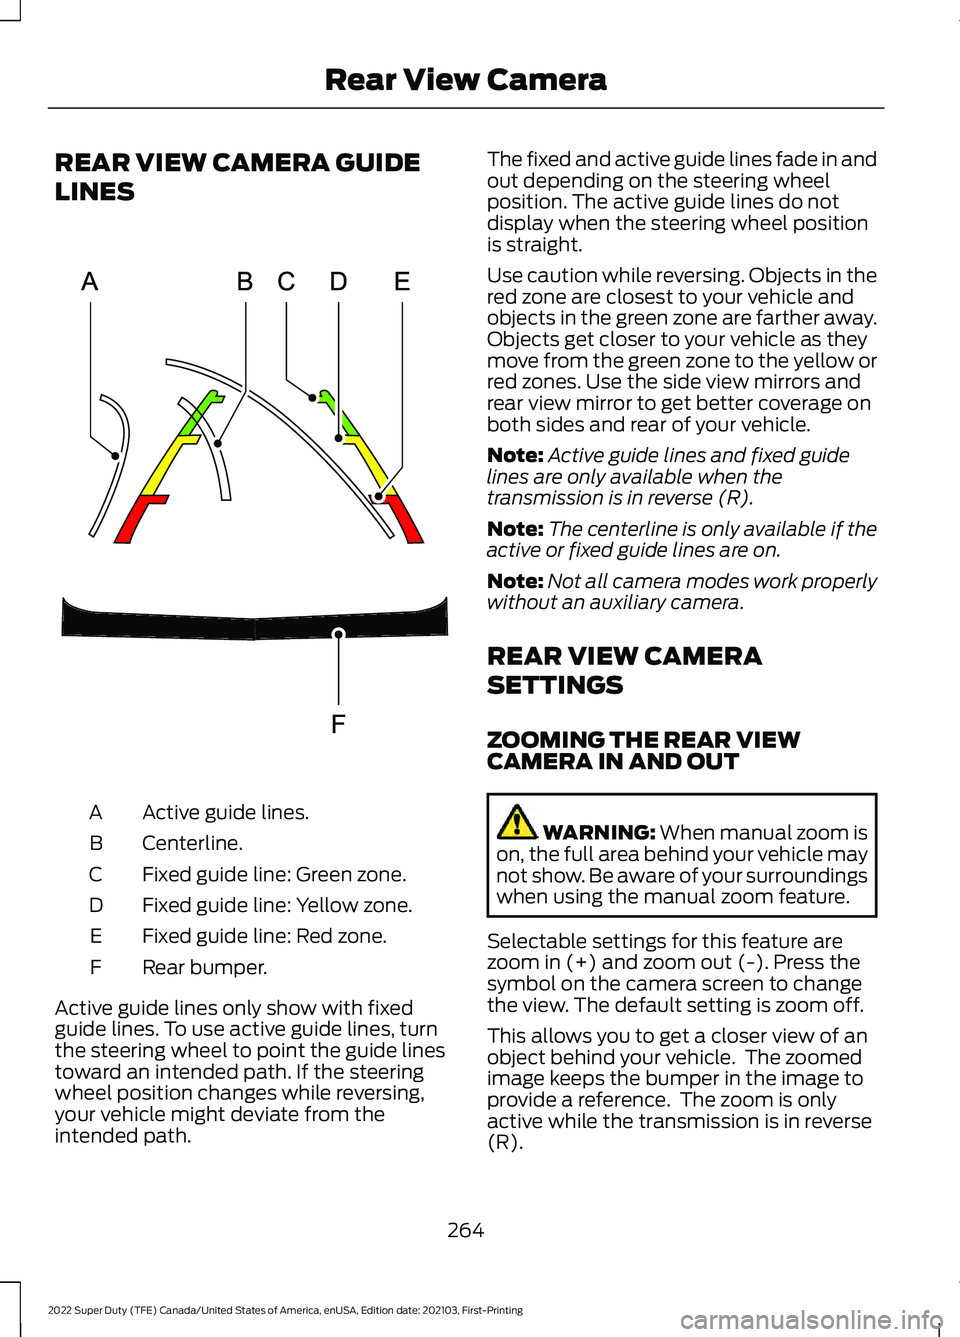 FORD F-600 2022  Owners Manual REAR VIEW CAMERA GUIDE
LINES
Active guide lines.
A
Centerline.
B
Fixed guide line: Green zone.
C
Fixed guide line: Yellow zone.
D
Fixed guide line: Red zone.
E
Rear bumper.
F
Active guide lines only s